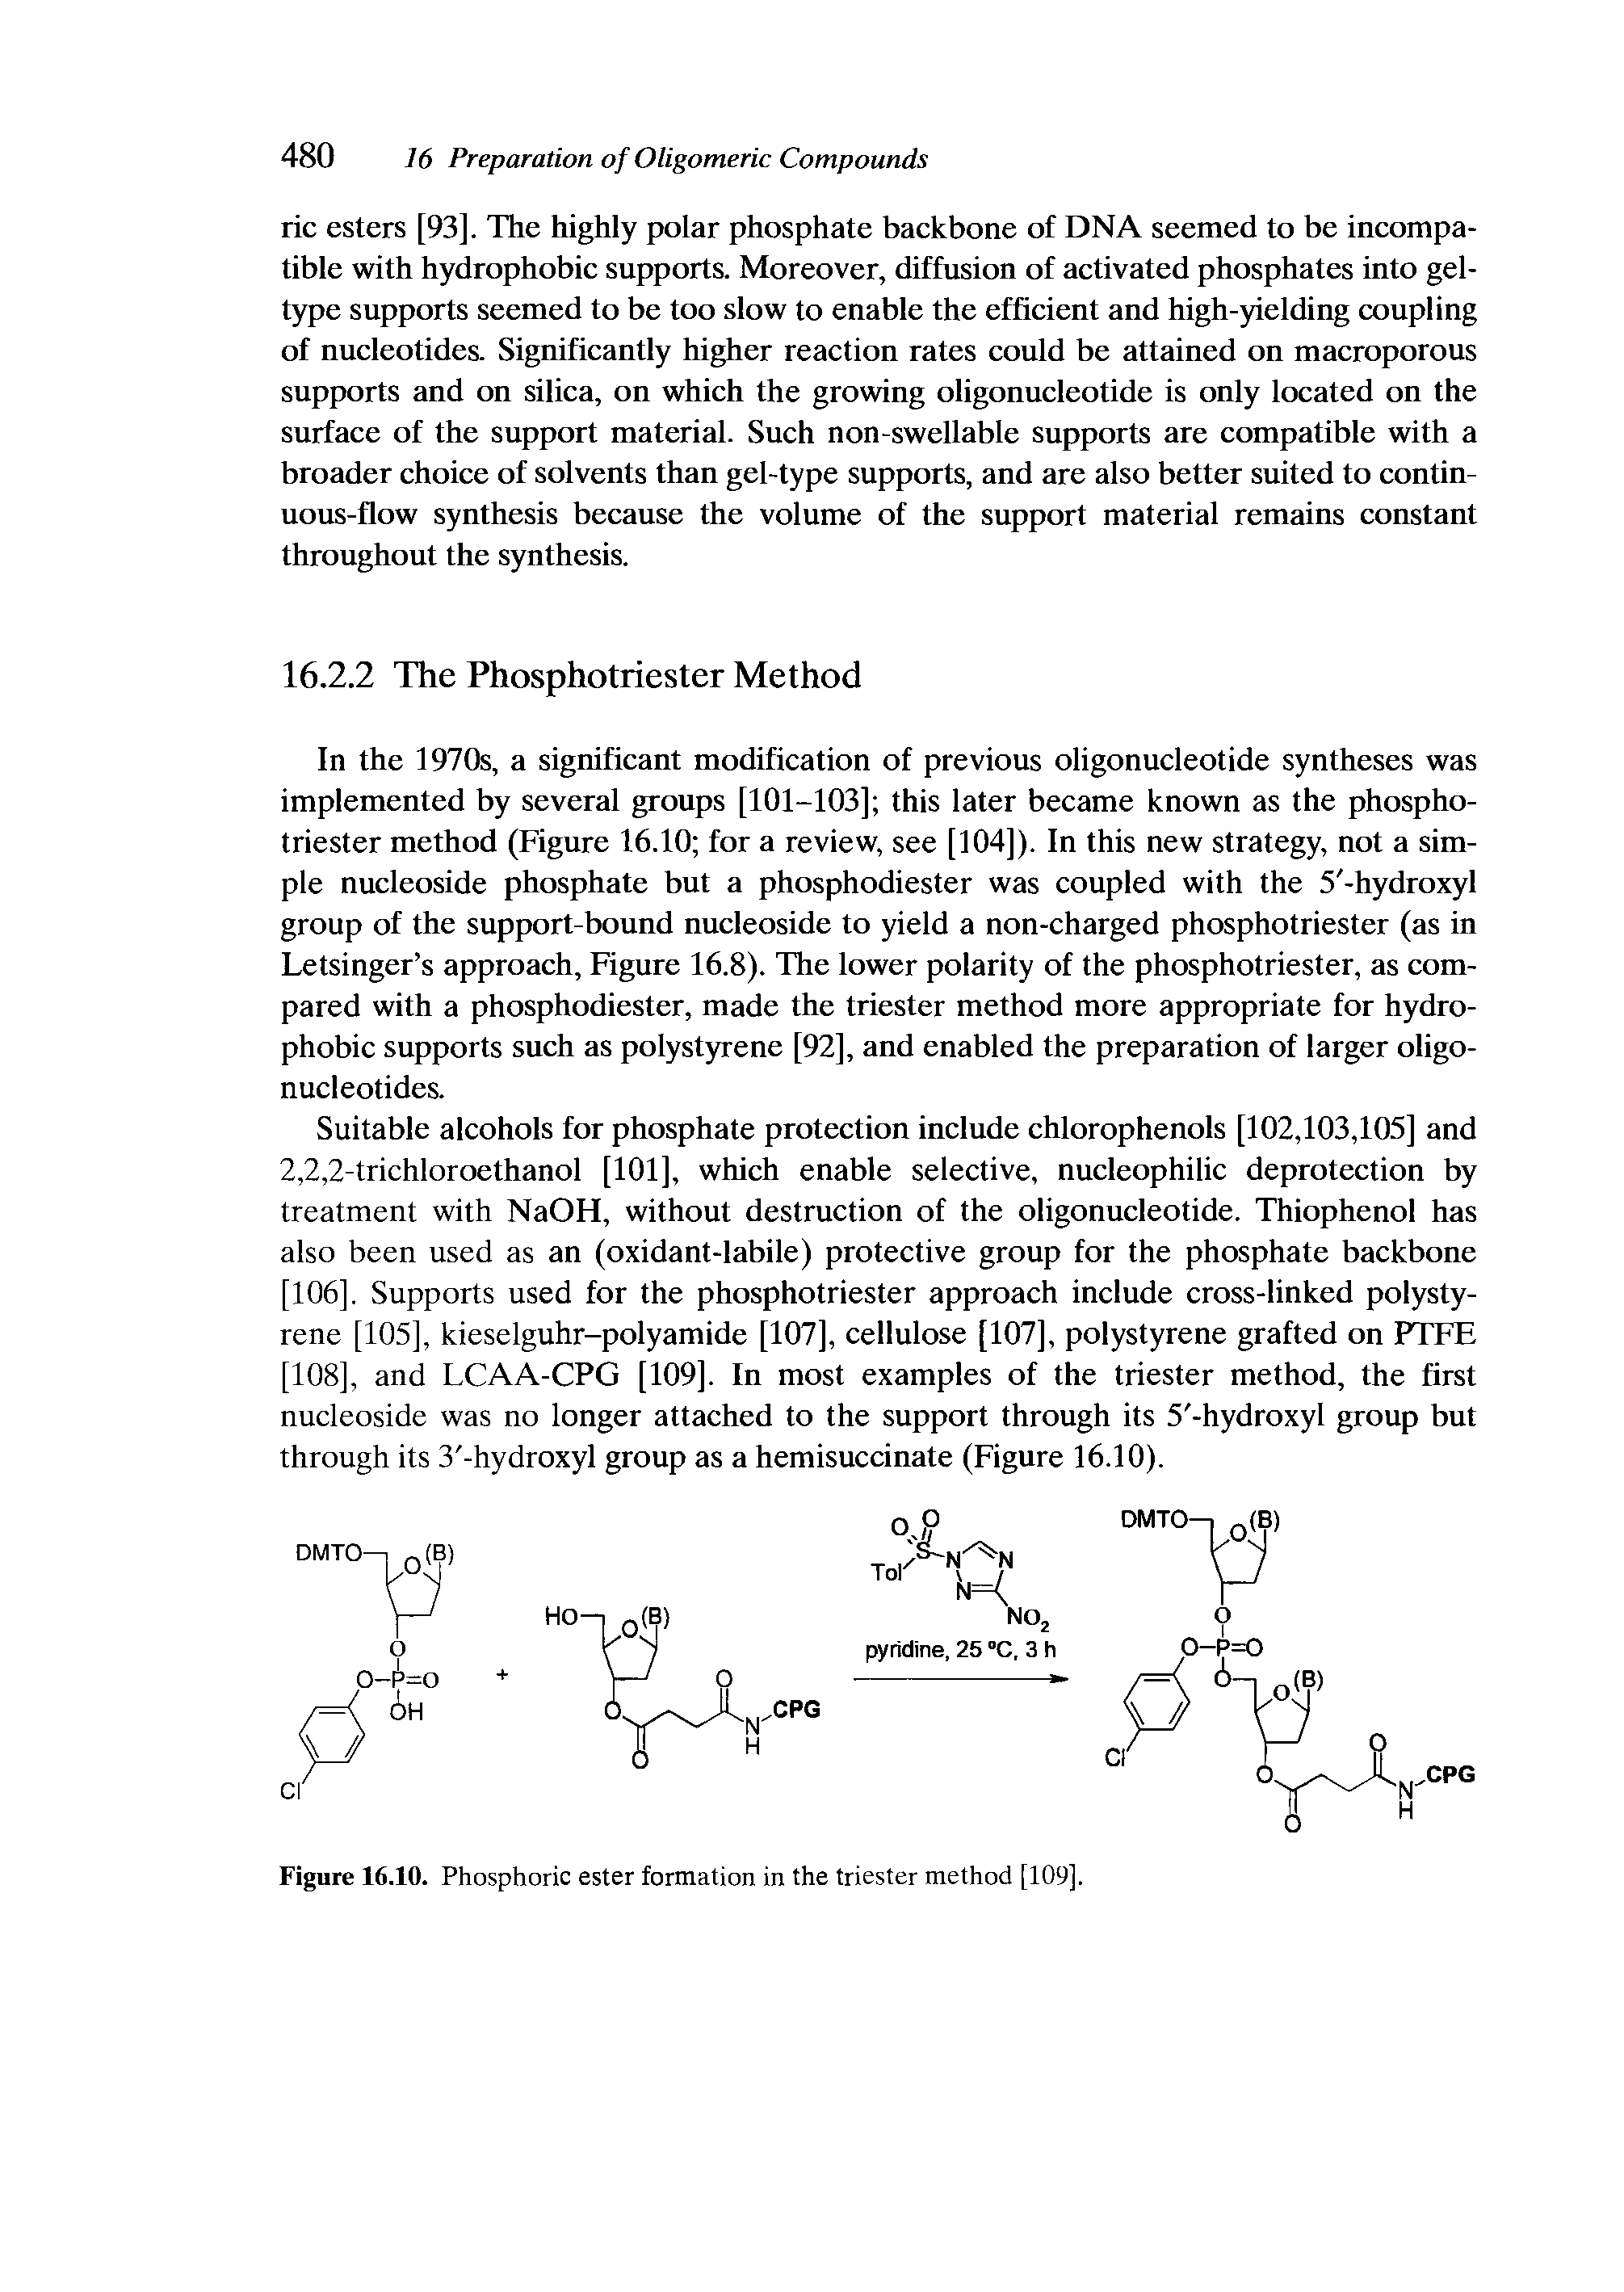 Figure 16.10. Phosphoric ester formation in the triester method [109].